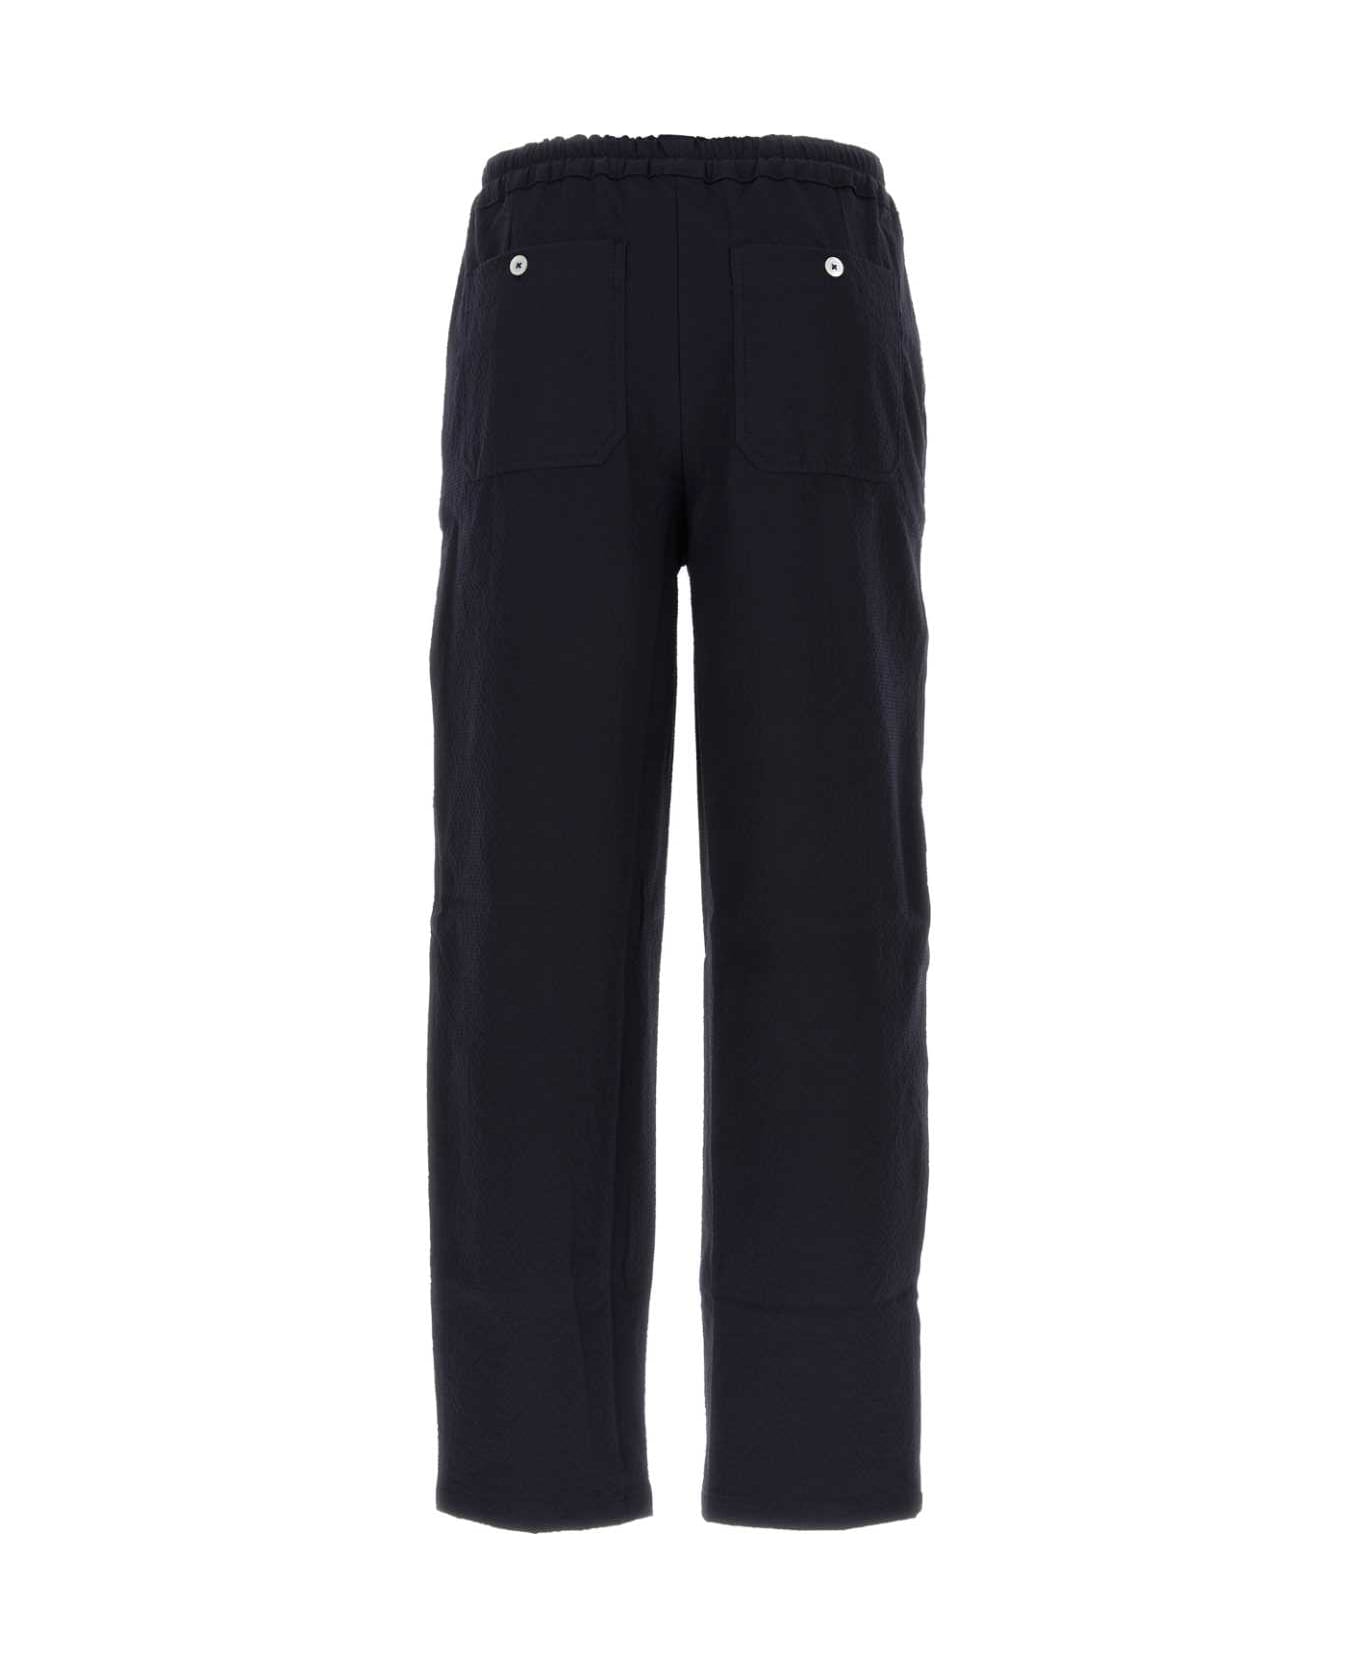 Howlin Navy Blue Stretch Cotton Tropical Pant - NAVY 